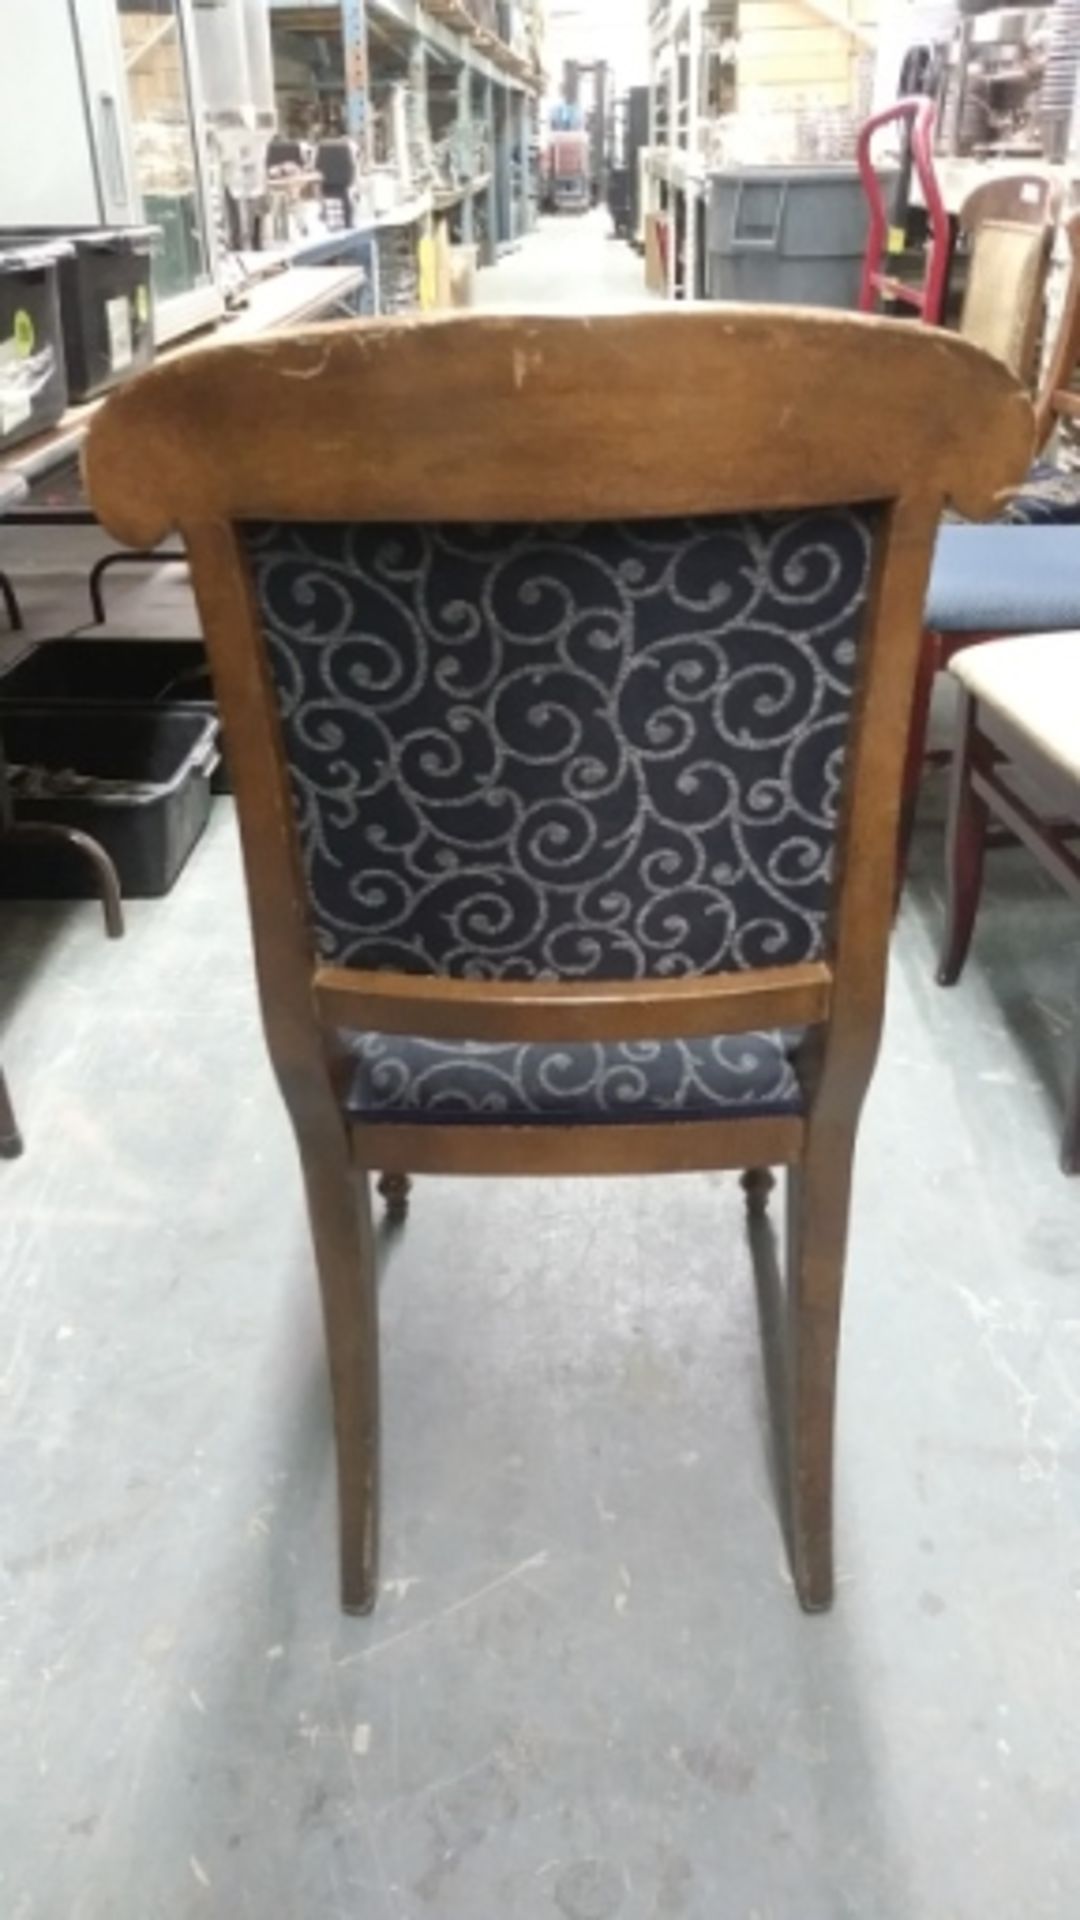 WOODEN FRAMED BLUE FLORAL DESIGN DINING CHAIRS (QTY X MONEY) - Image 3 of 3